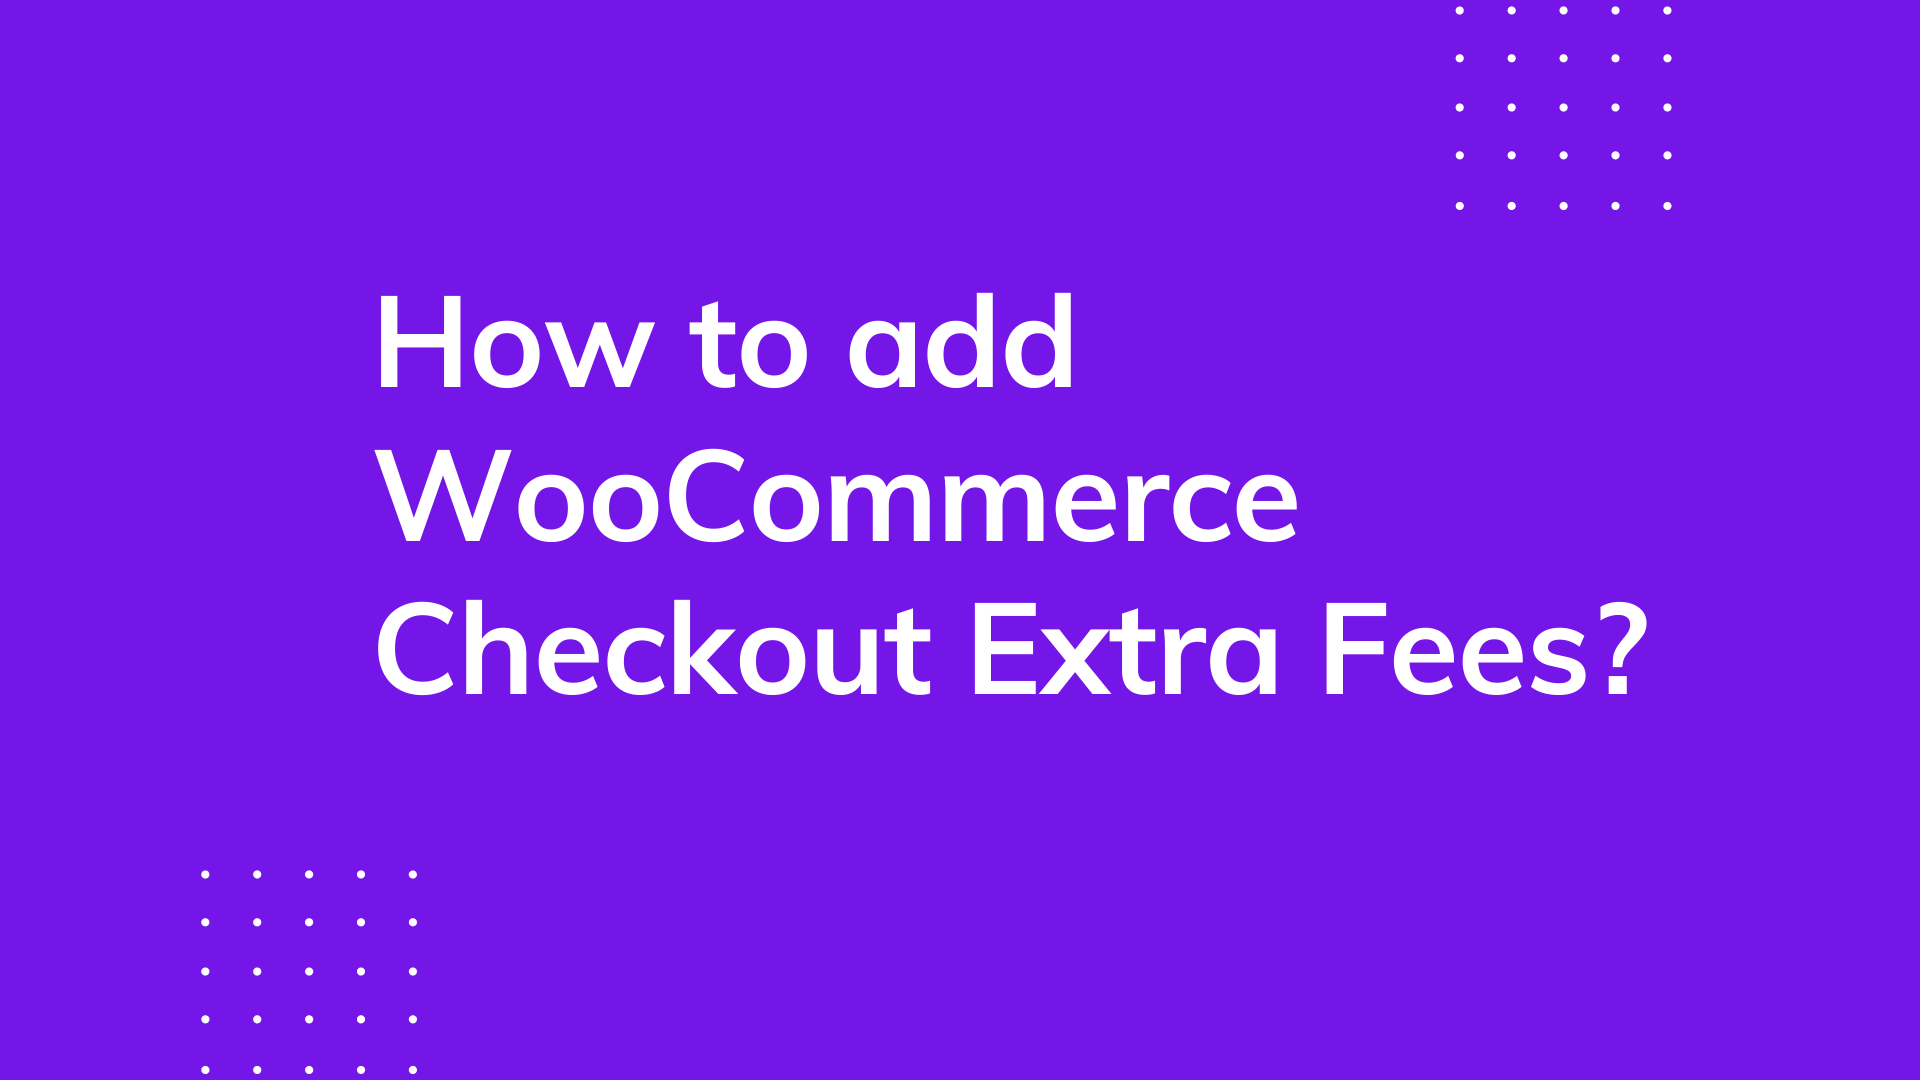 How to add WooCommerce Checkout extra fees?